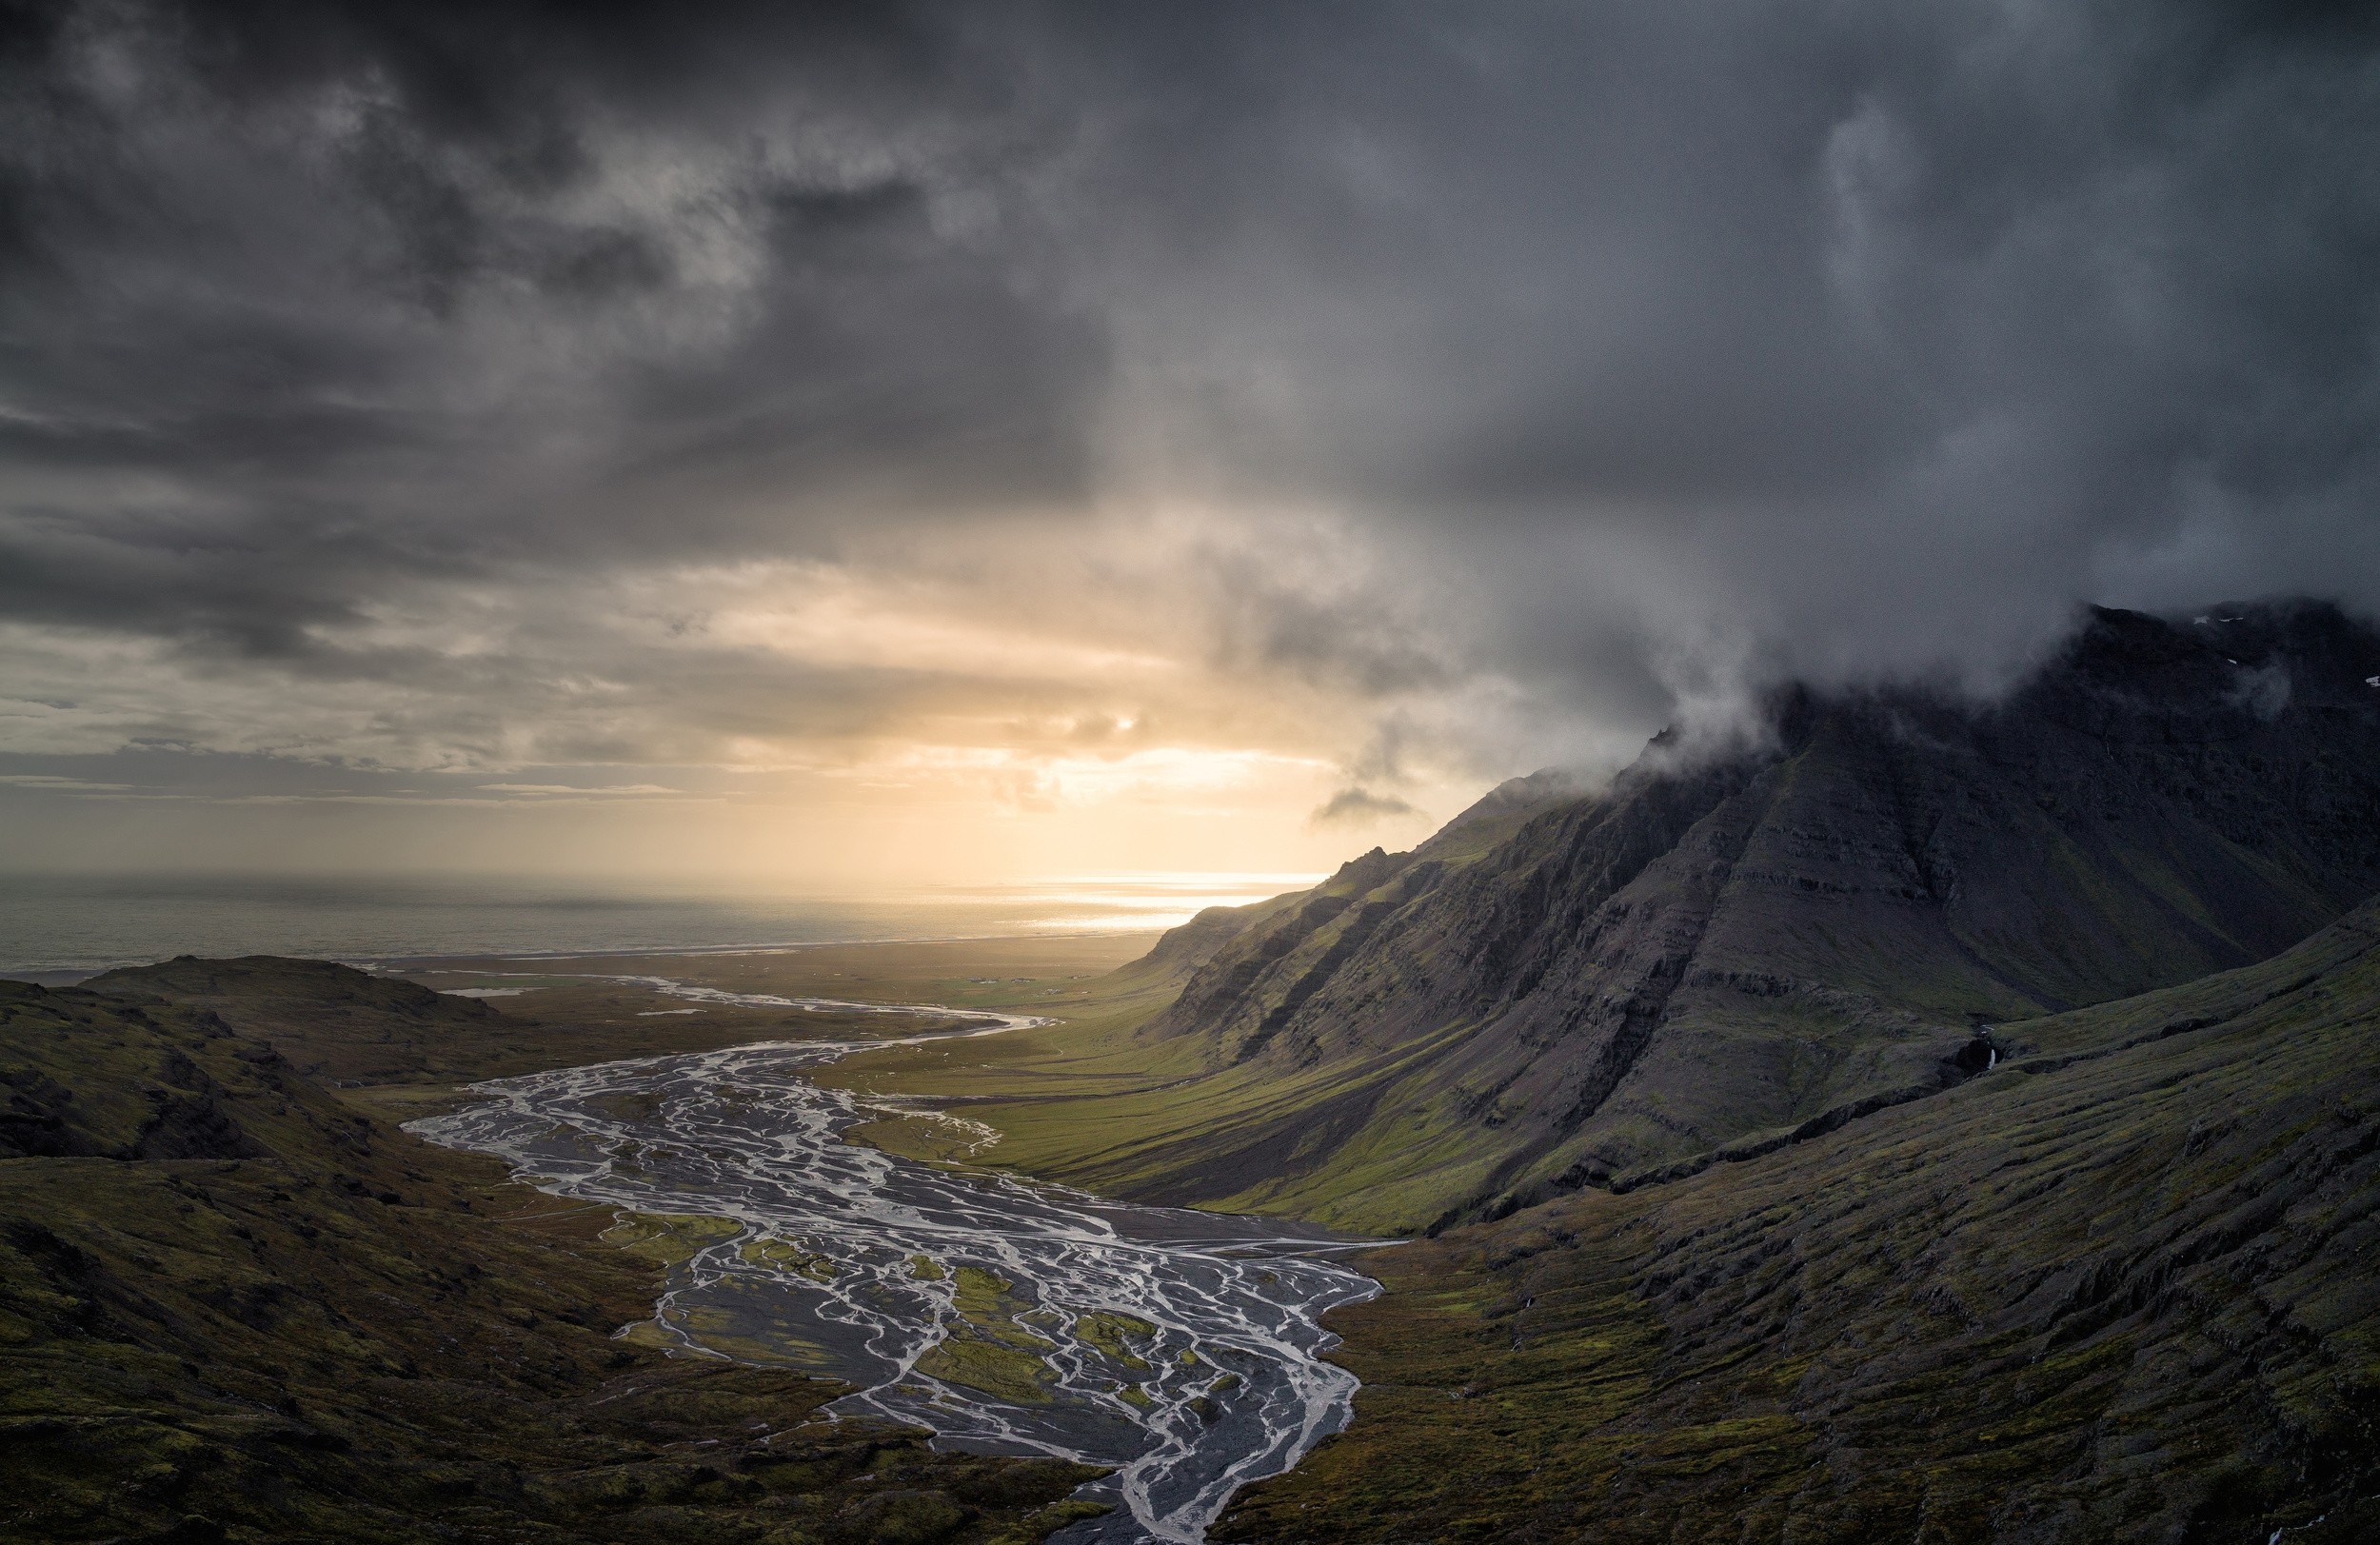 General 2500x1623 nature landscape dark clouds mountains river valley sunset sea Iceland nordic landscapes